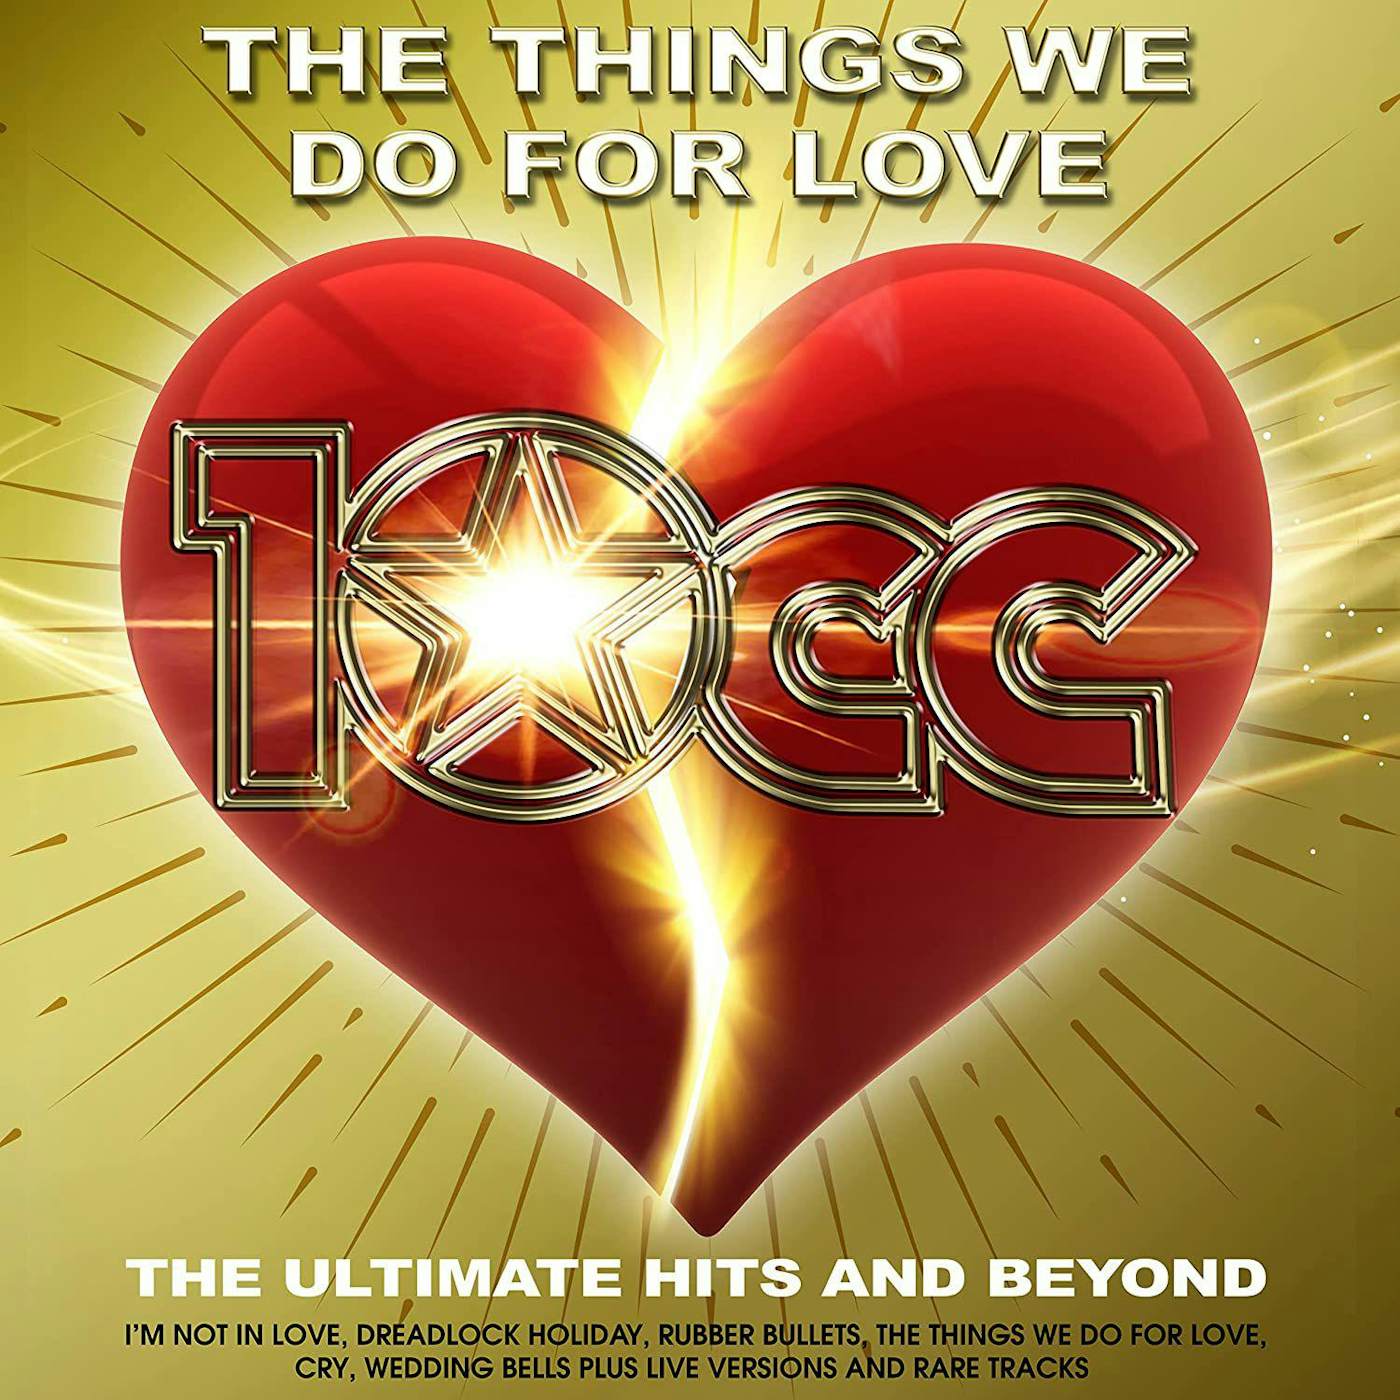 10cc THINGS WE DO FOR LOVE: THE ULTIMATE HITS & BEYOND Vinyl Record